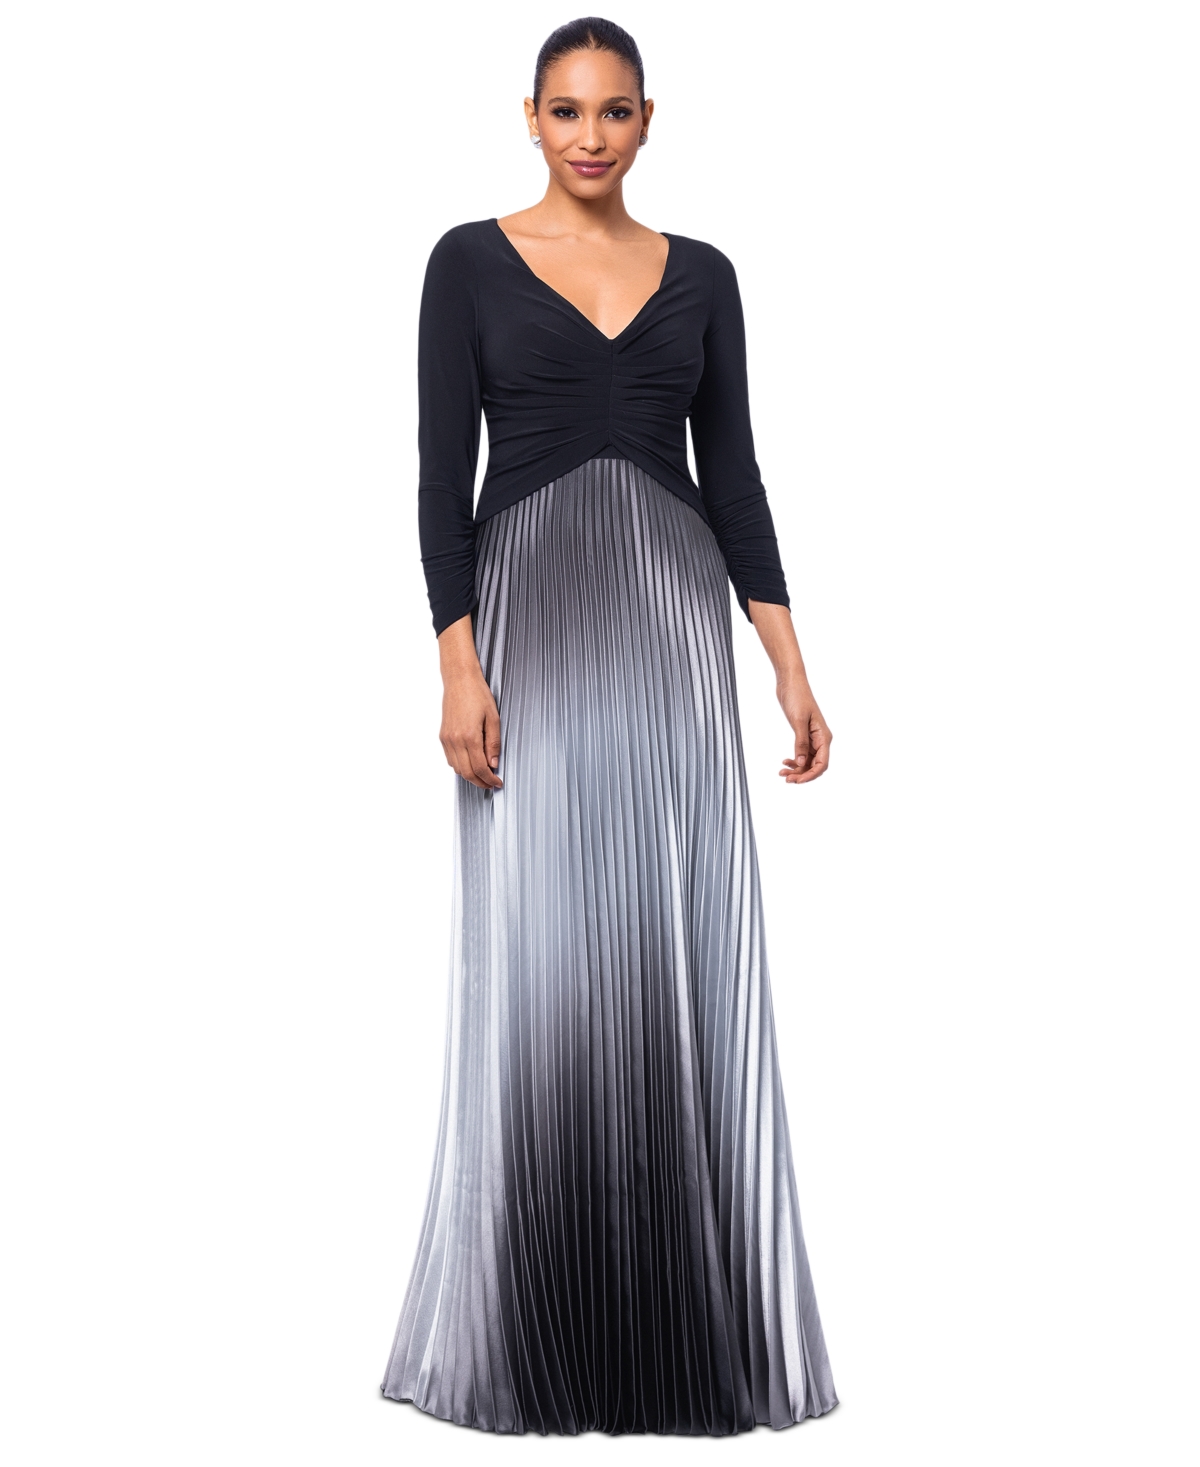 Women's Ombre Pleated 3/4-Sleeve Gown - Black/Silver